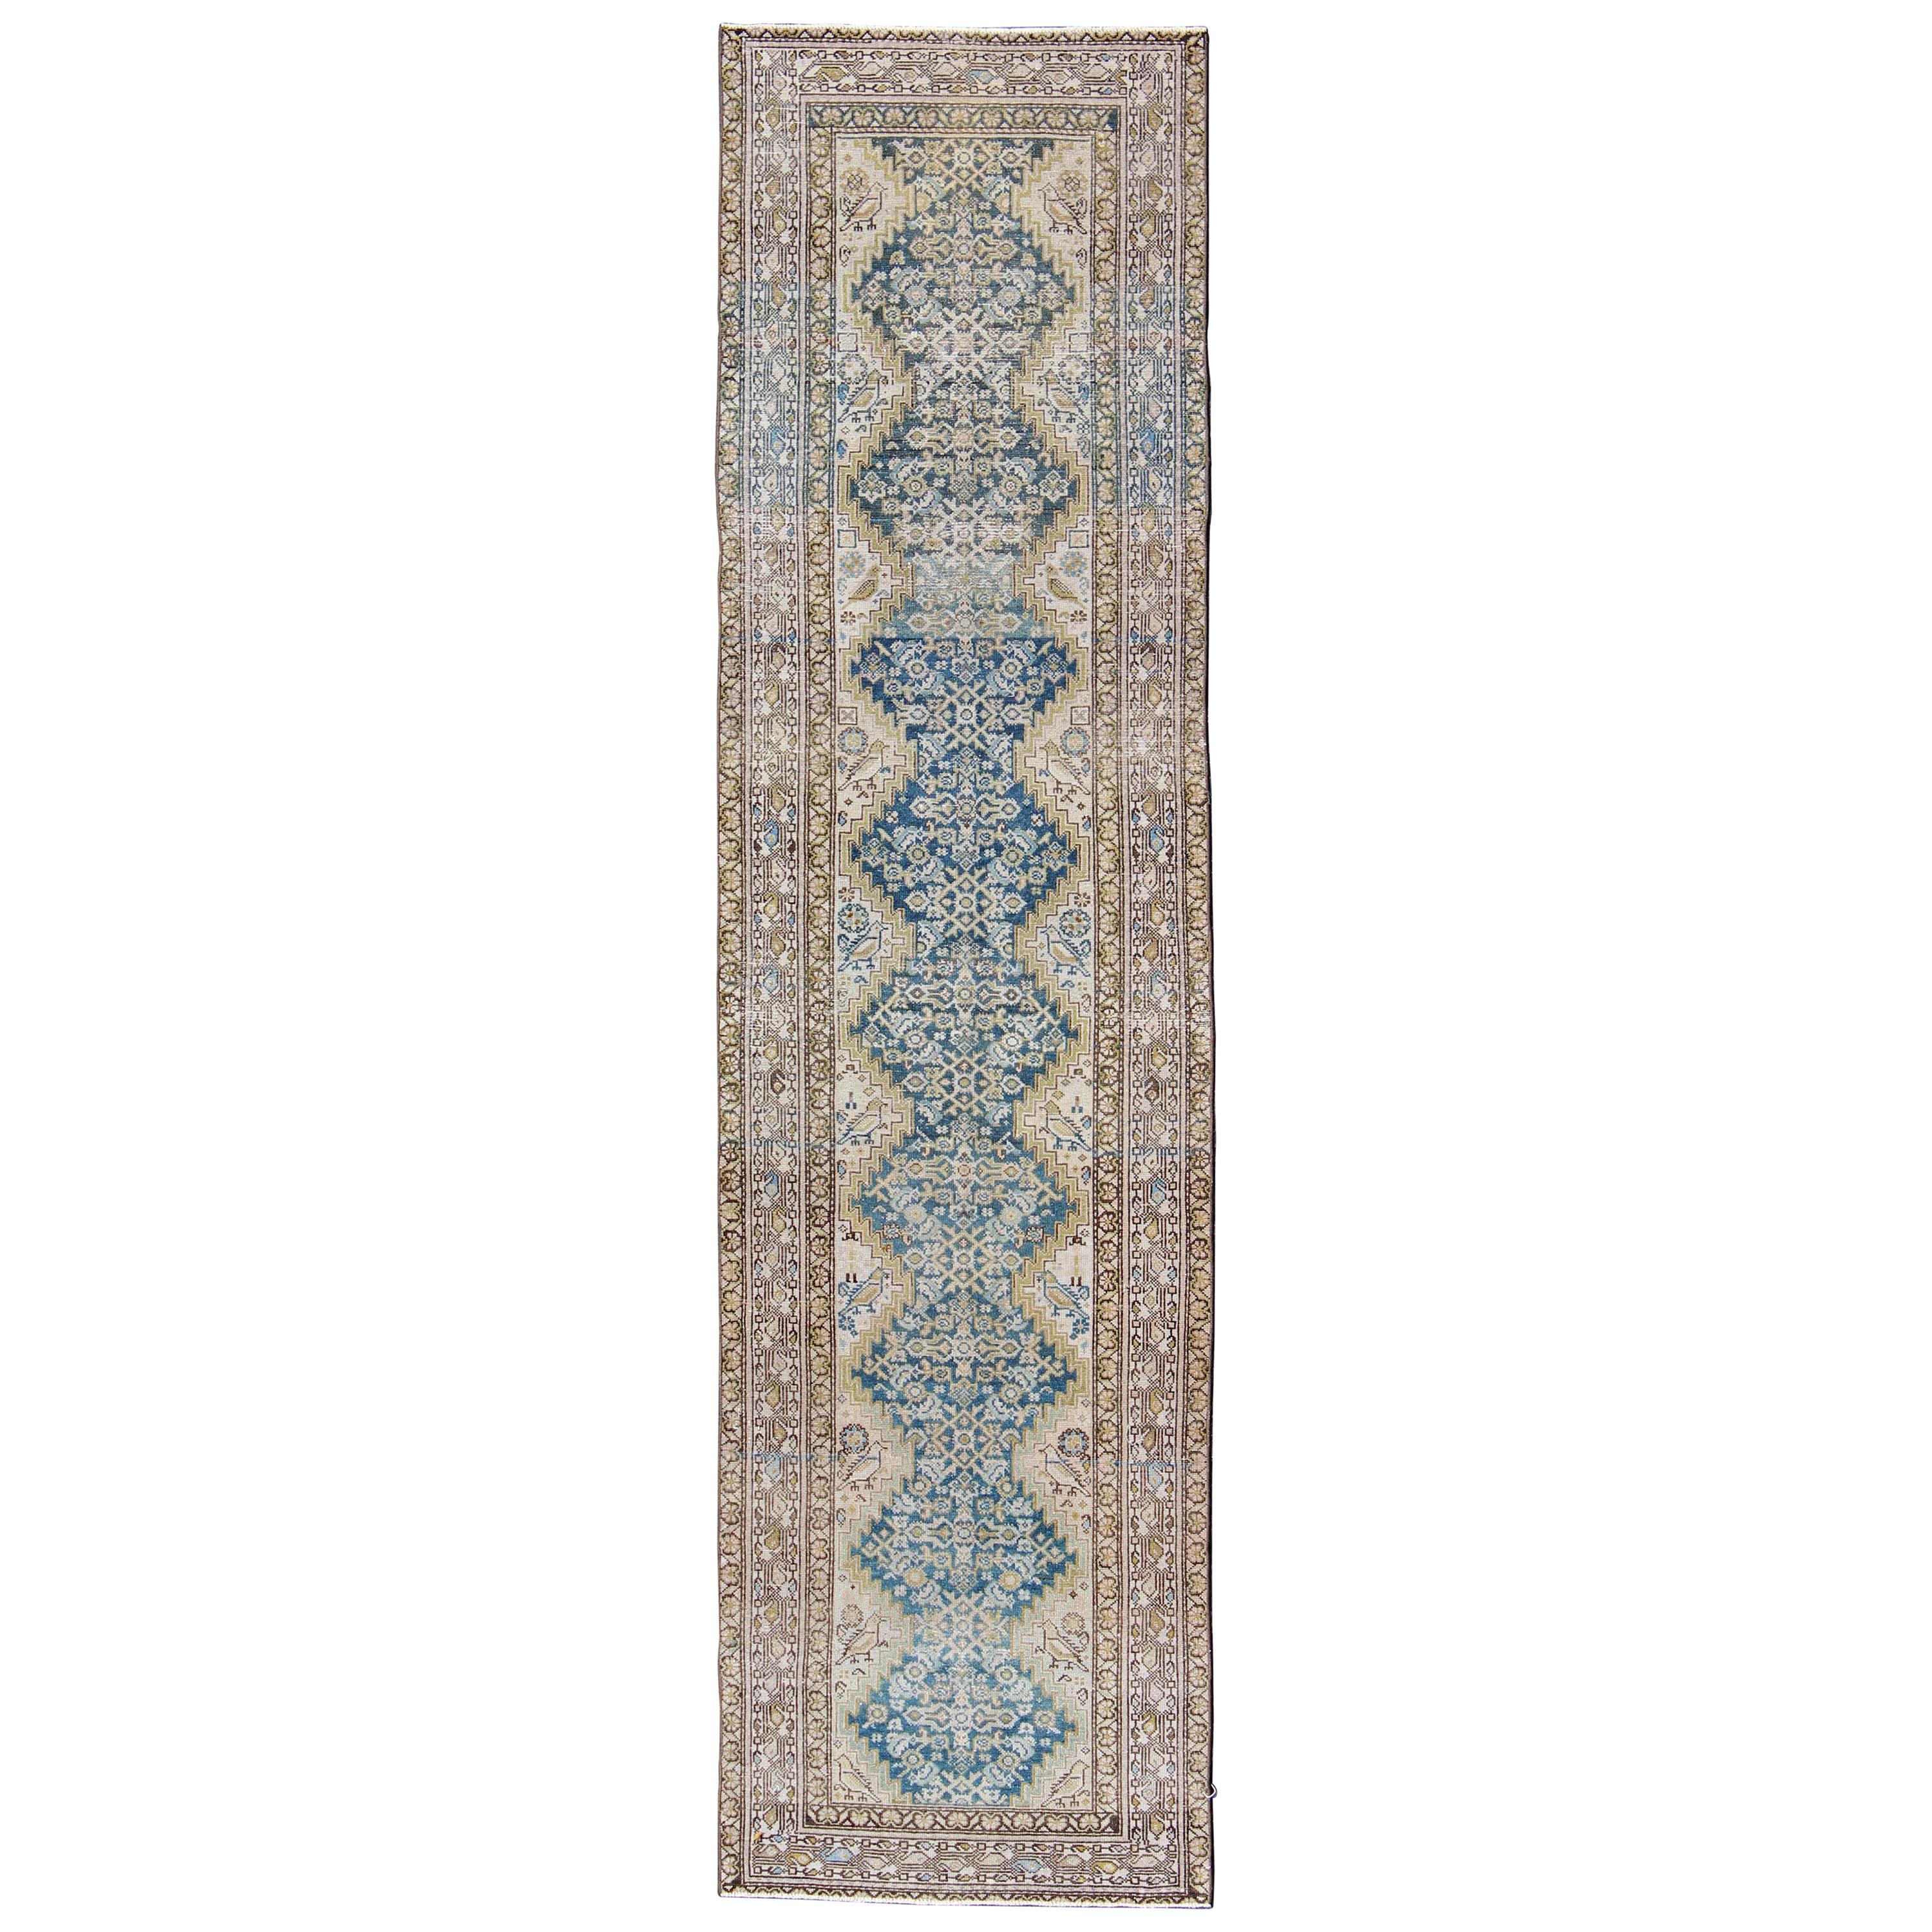 Blue Green, Teal, Brown, Yellow and Yellow Green Antique Persian Malayer Runner